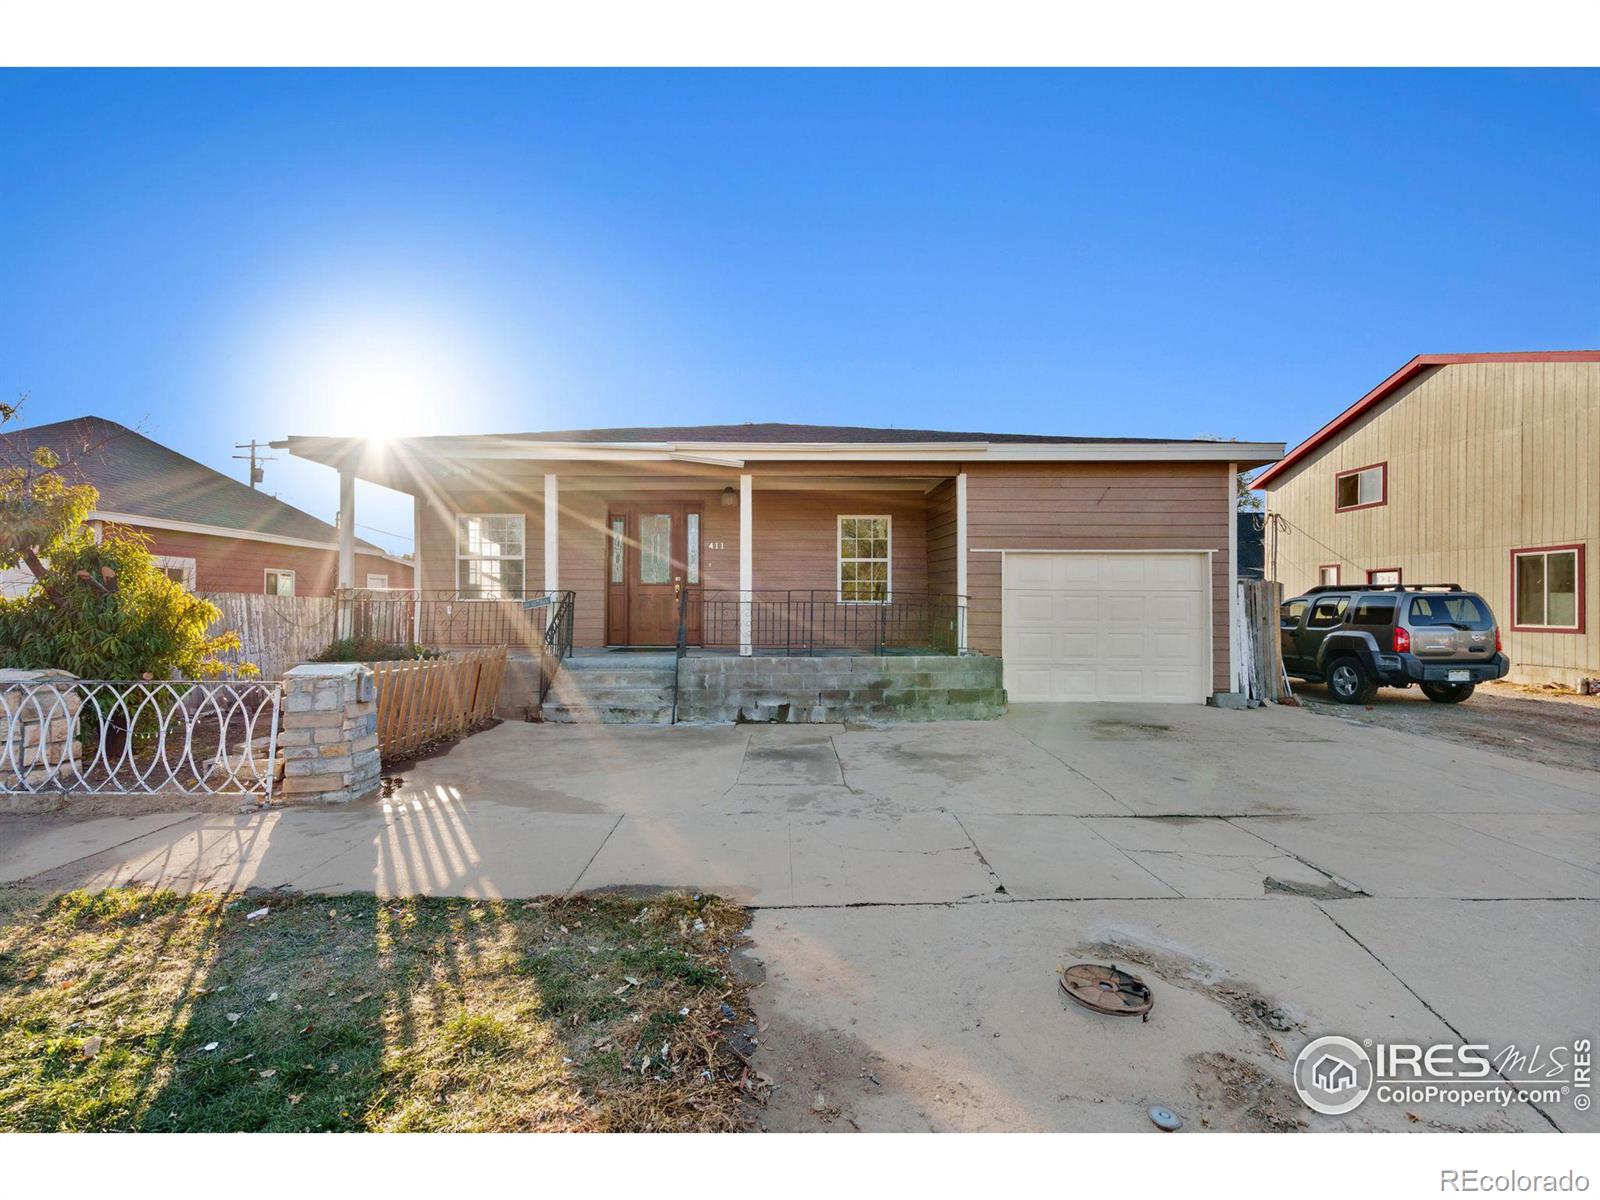 411  10th avenue, Greeley sold home. Closed on 2024-03-15 for $385,000.